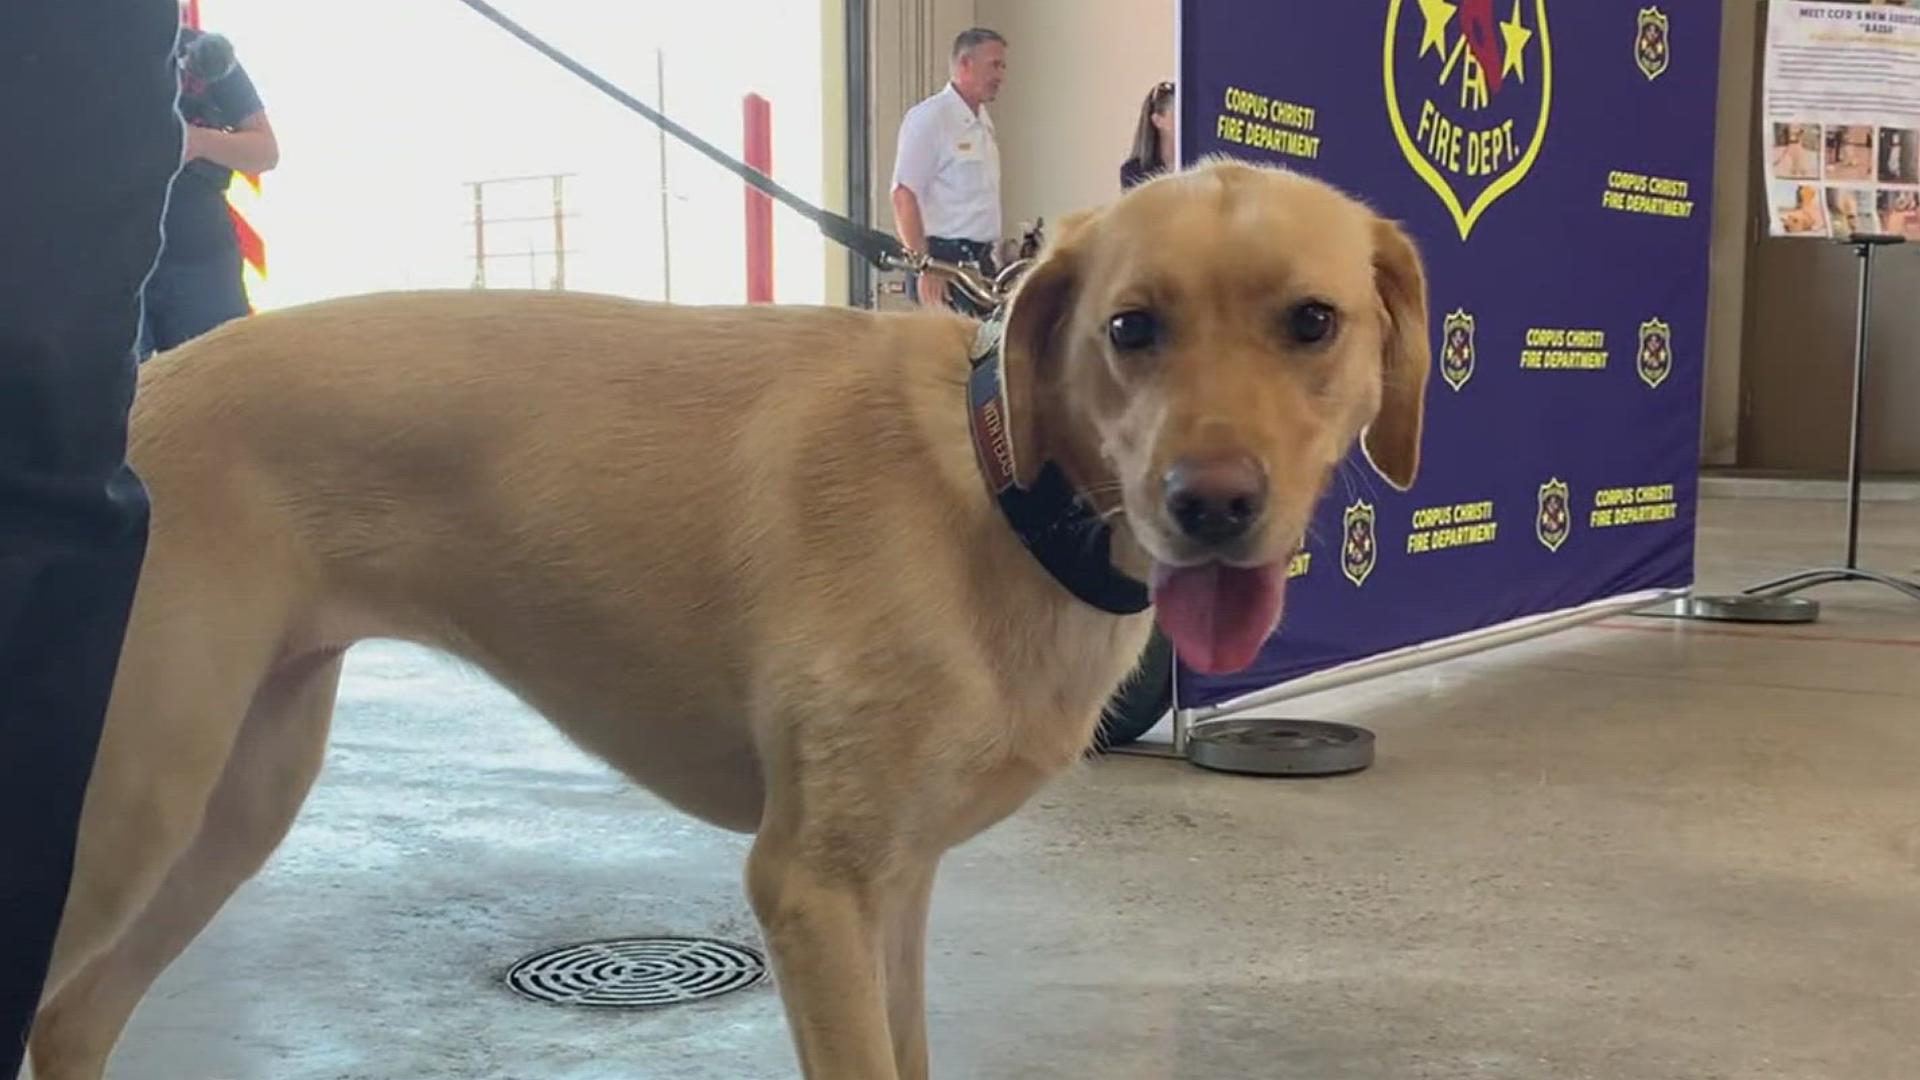 Fire officials say their arson dog works to detect hits, when it picks up the scent of flammable material that could be used to start a fire.